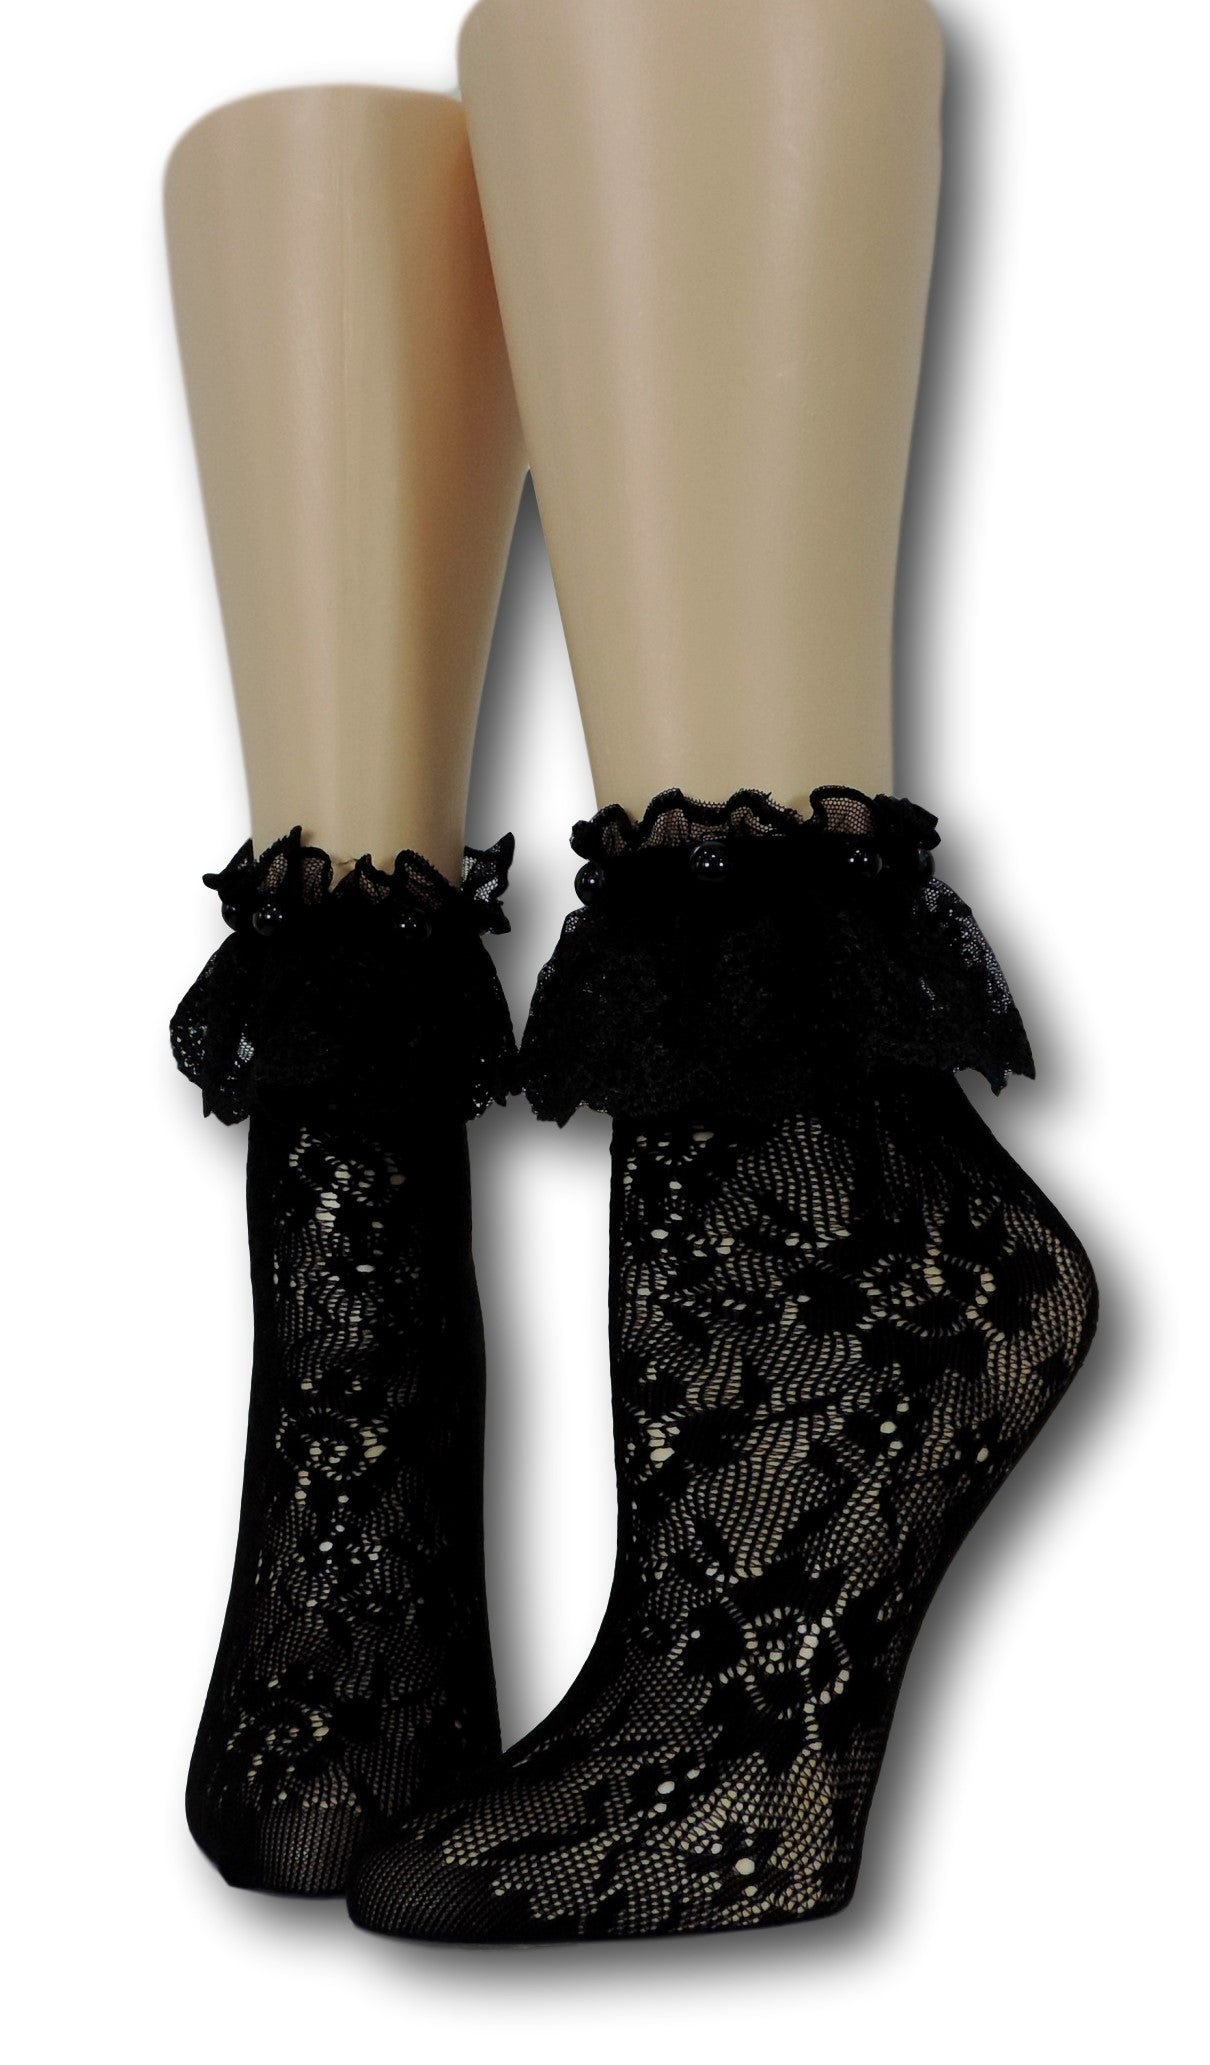 Black Floral Frilly Socks with beads